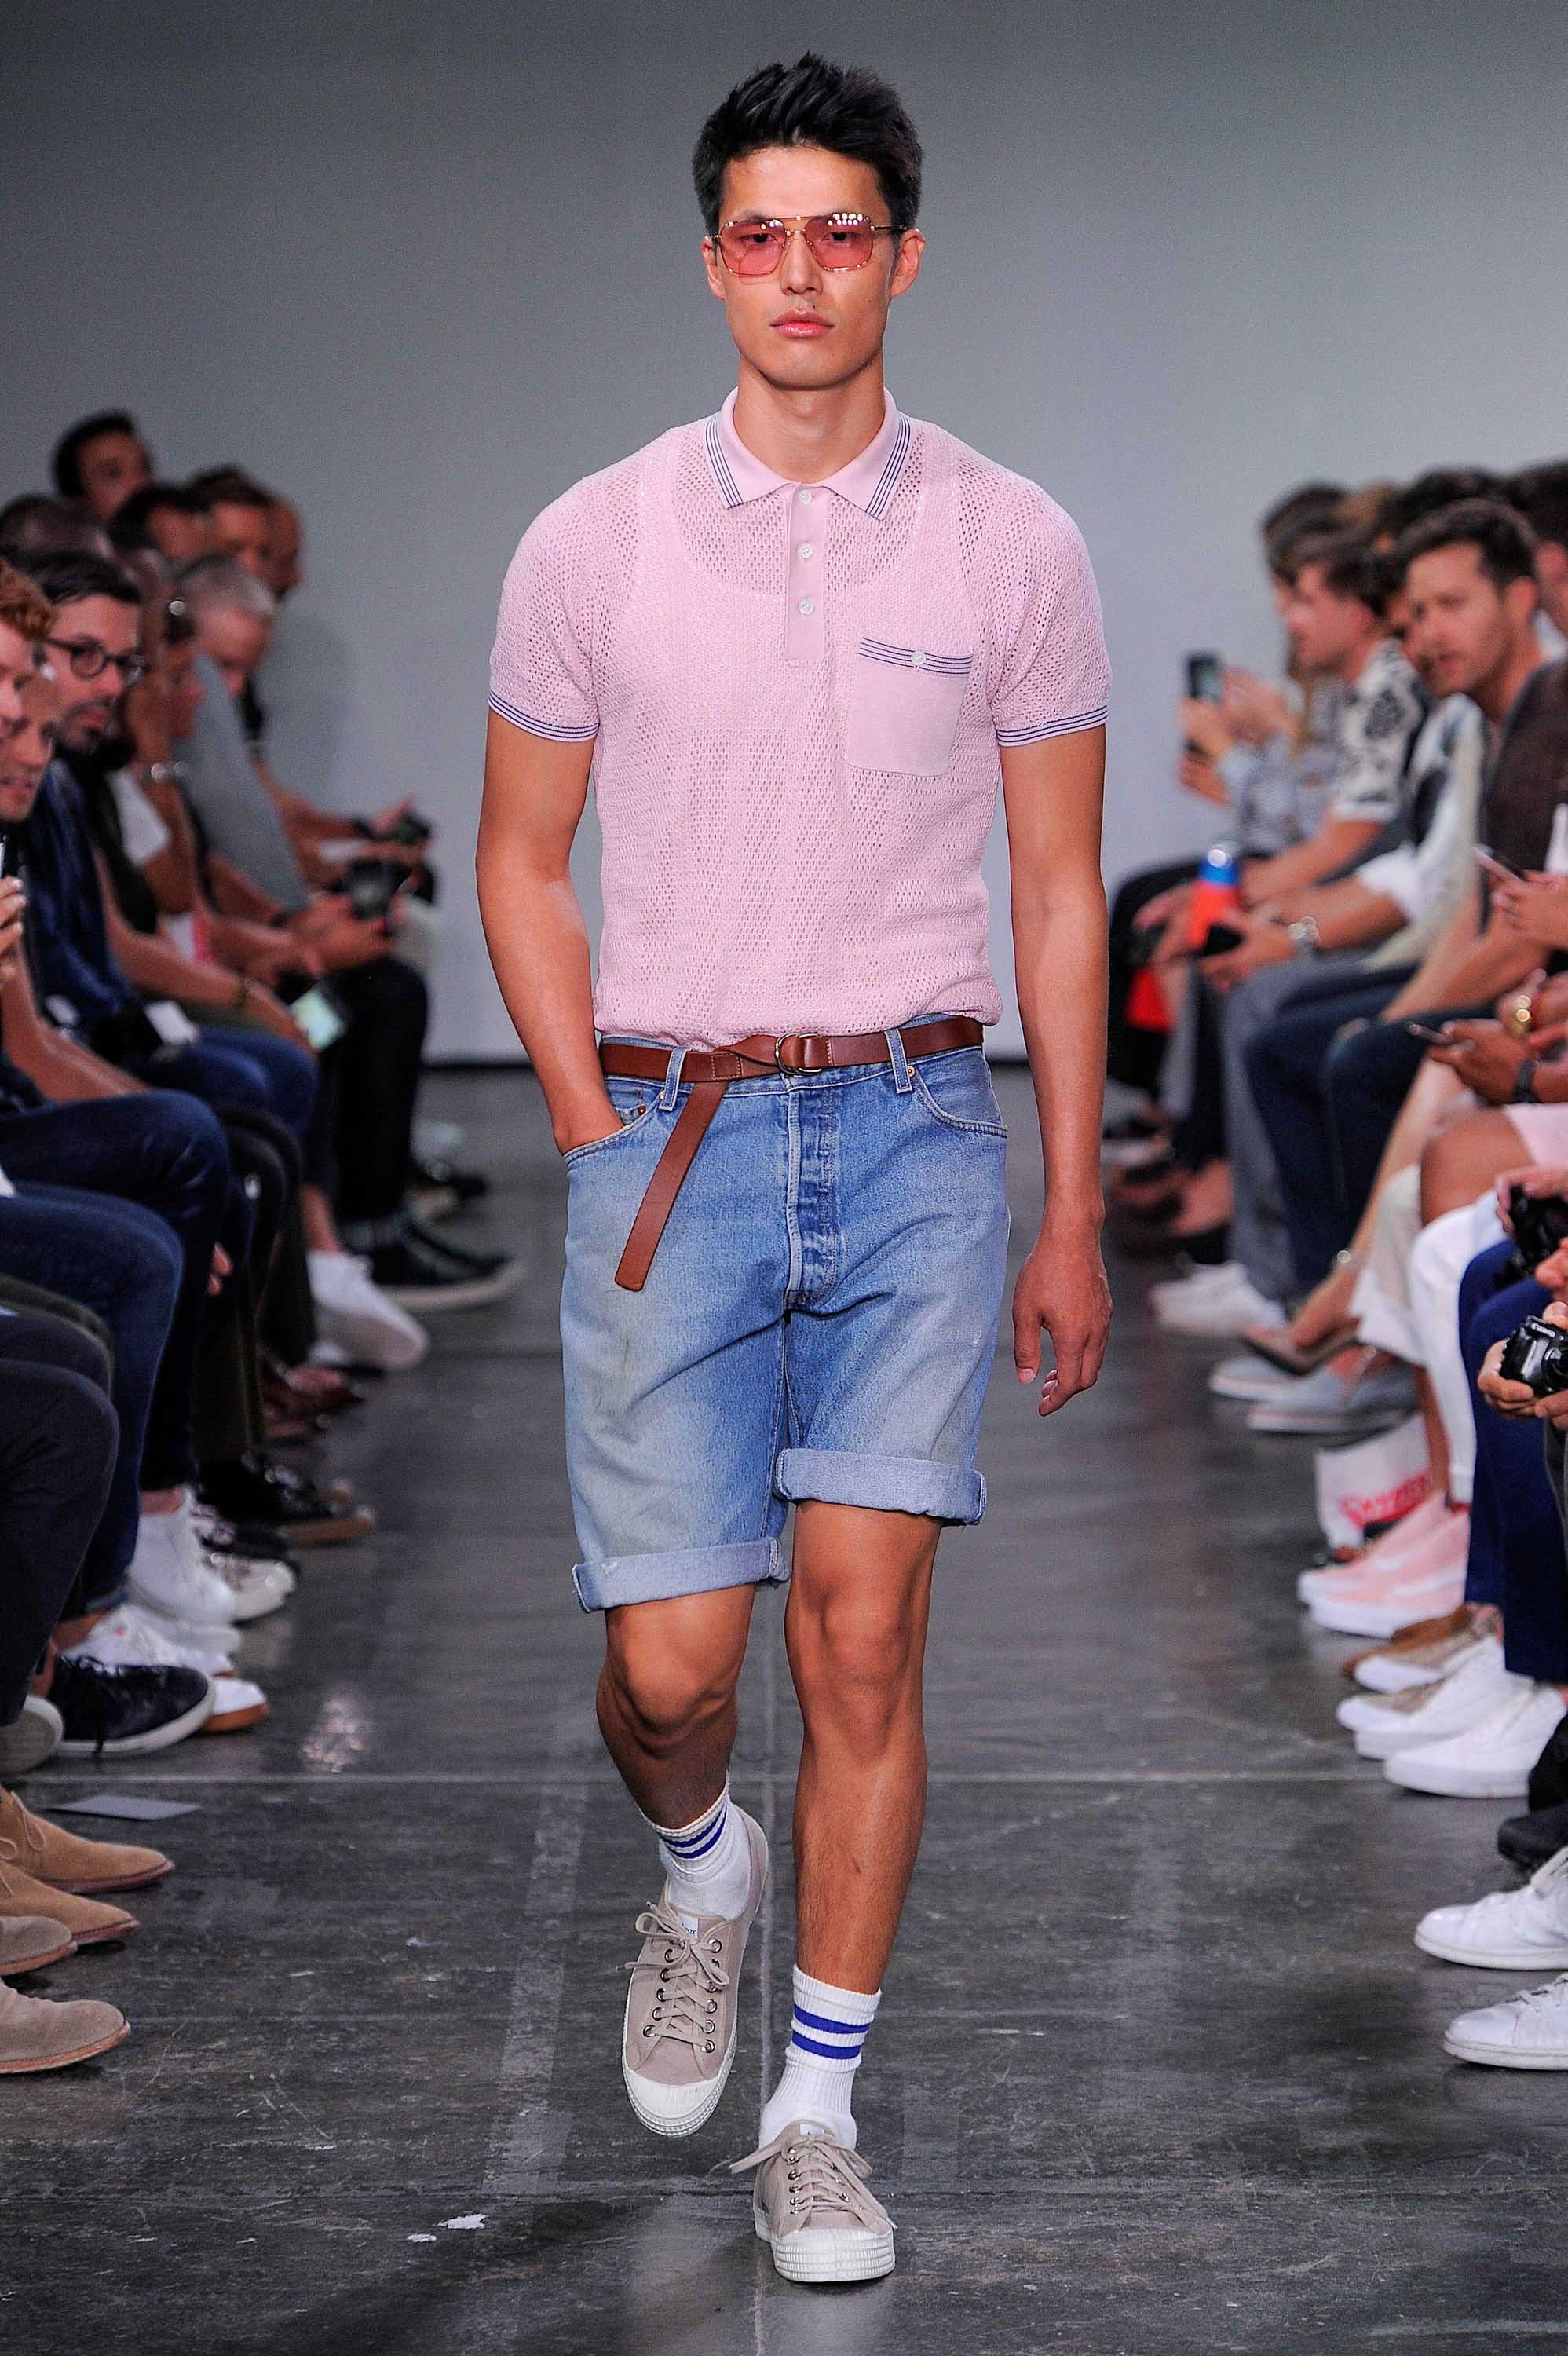 Men's Fashion: 22 top trends for Spring/Summer 2019